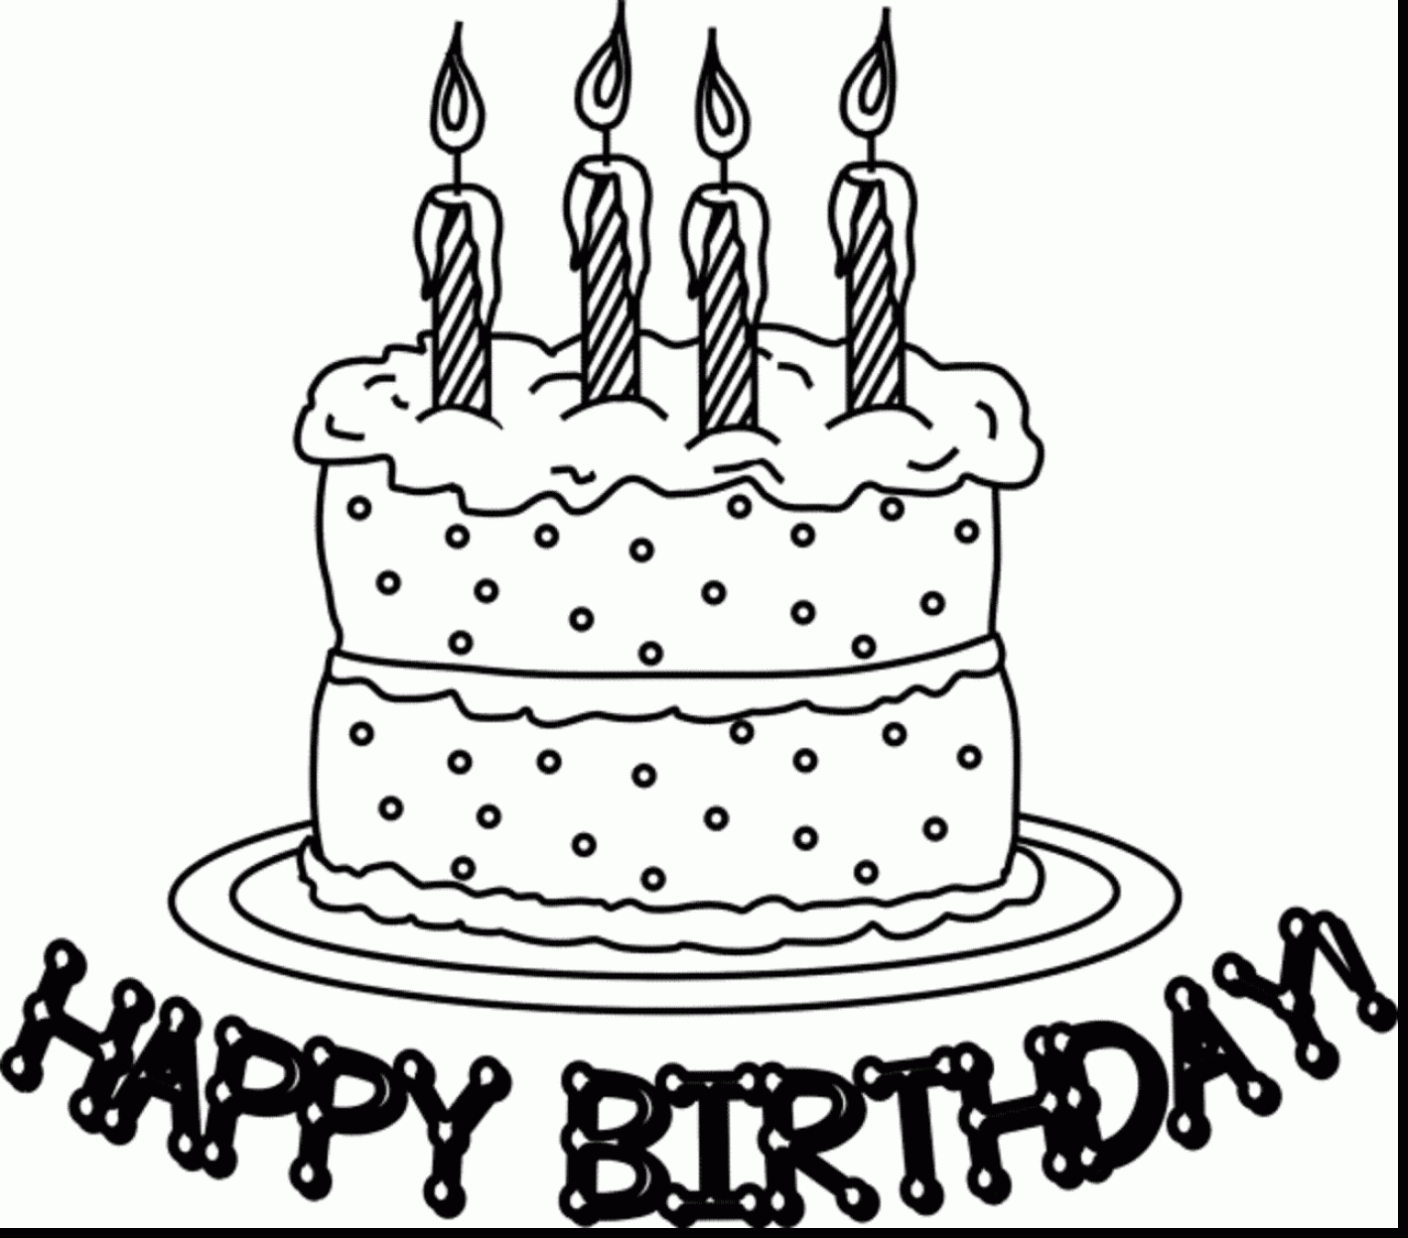 Free Clip art of Birthday Cake Clipart Black and White 3524 Best 